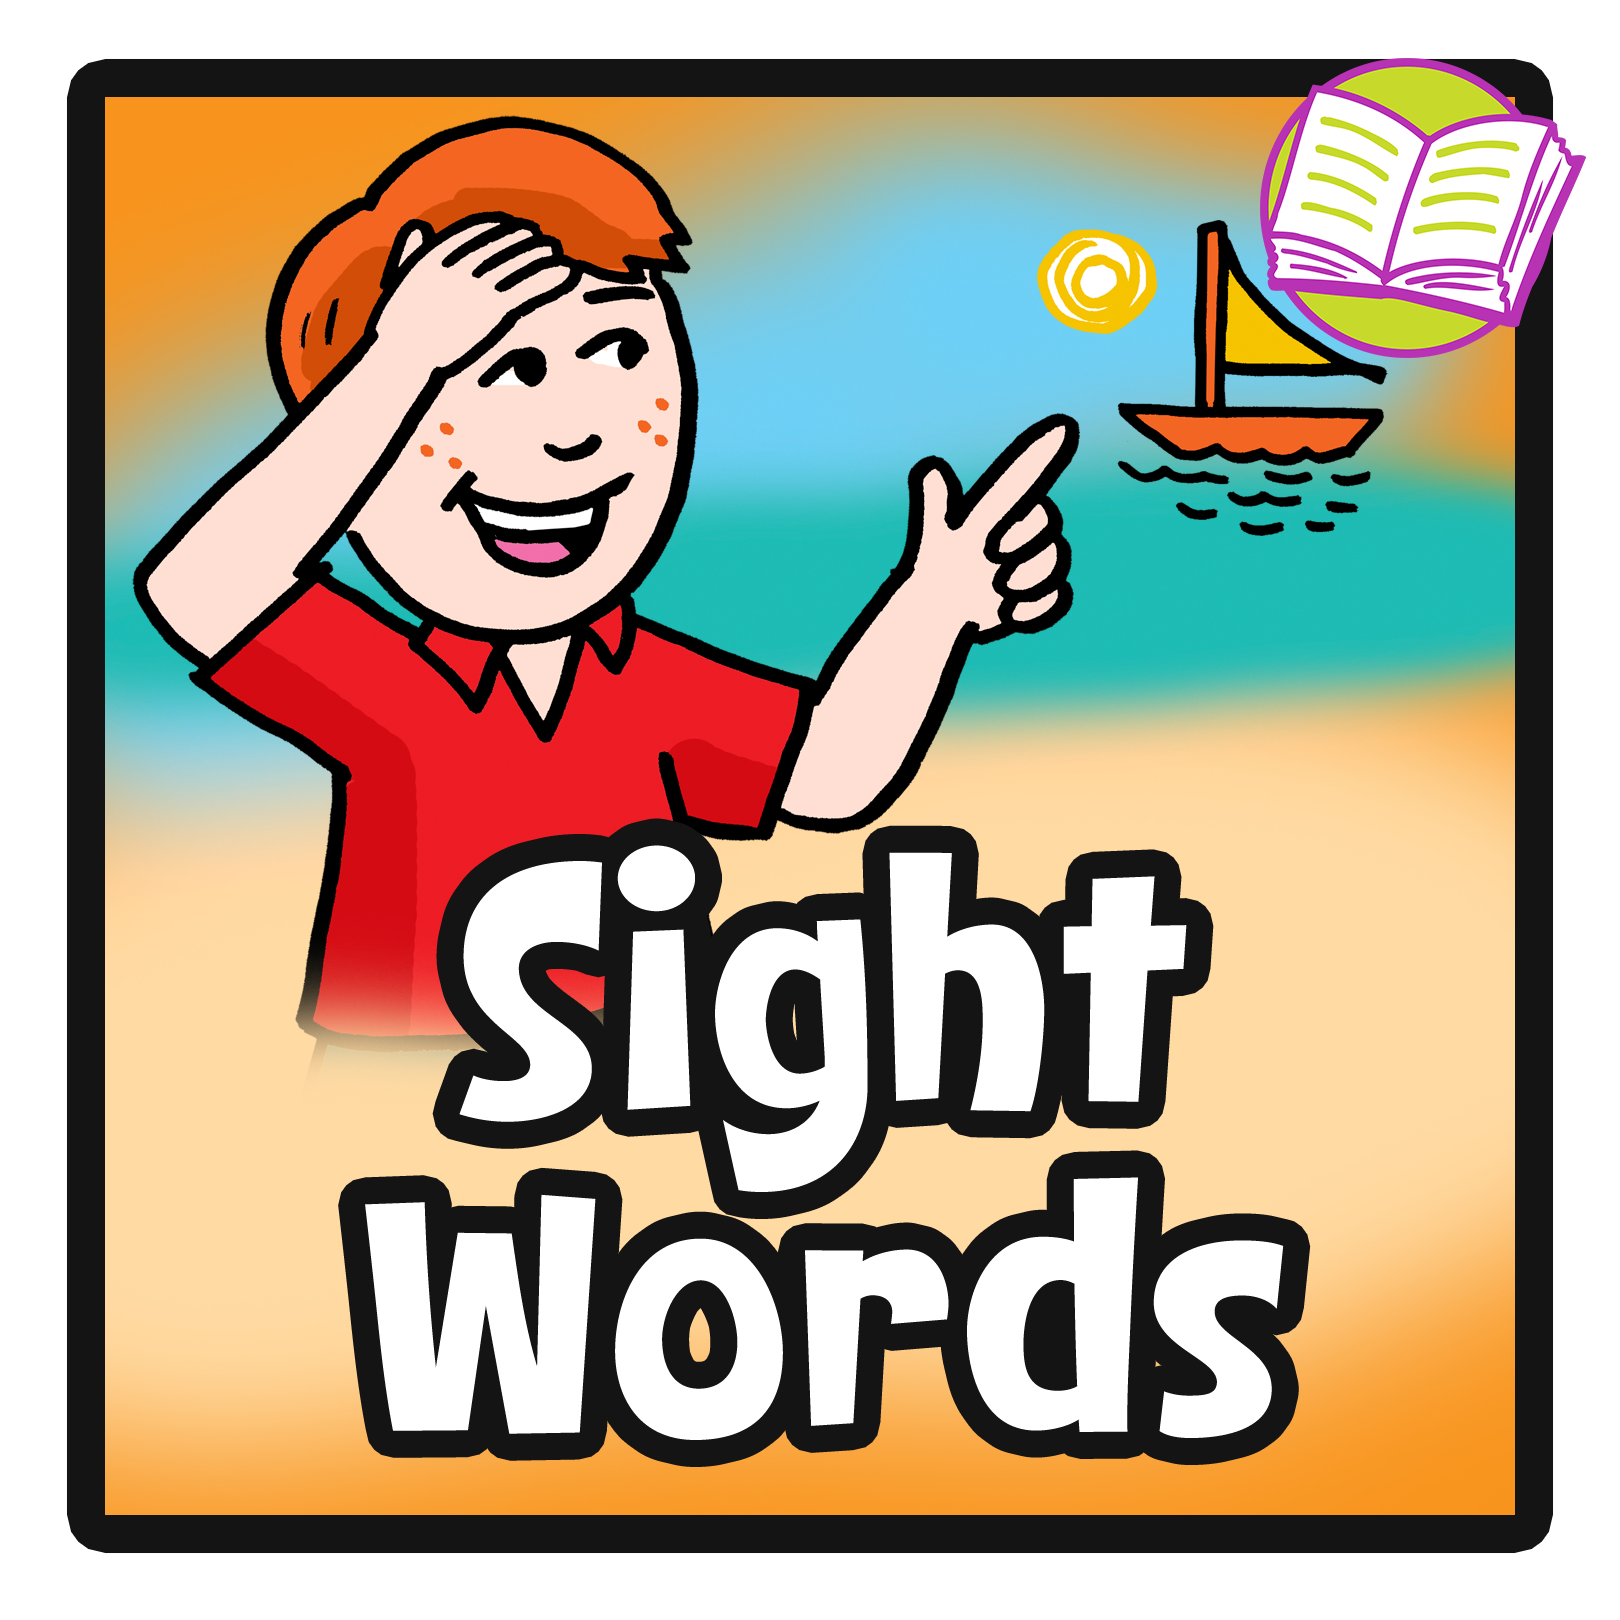 Words Clipart Look At Words Clip Art Images Sight Words Clipart ...